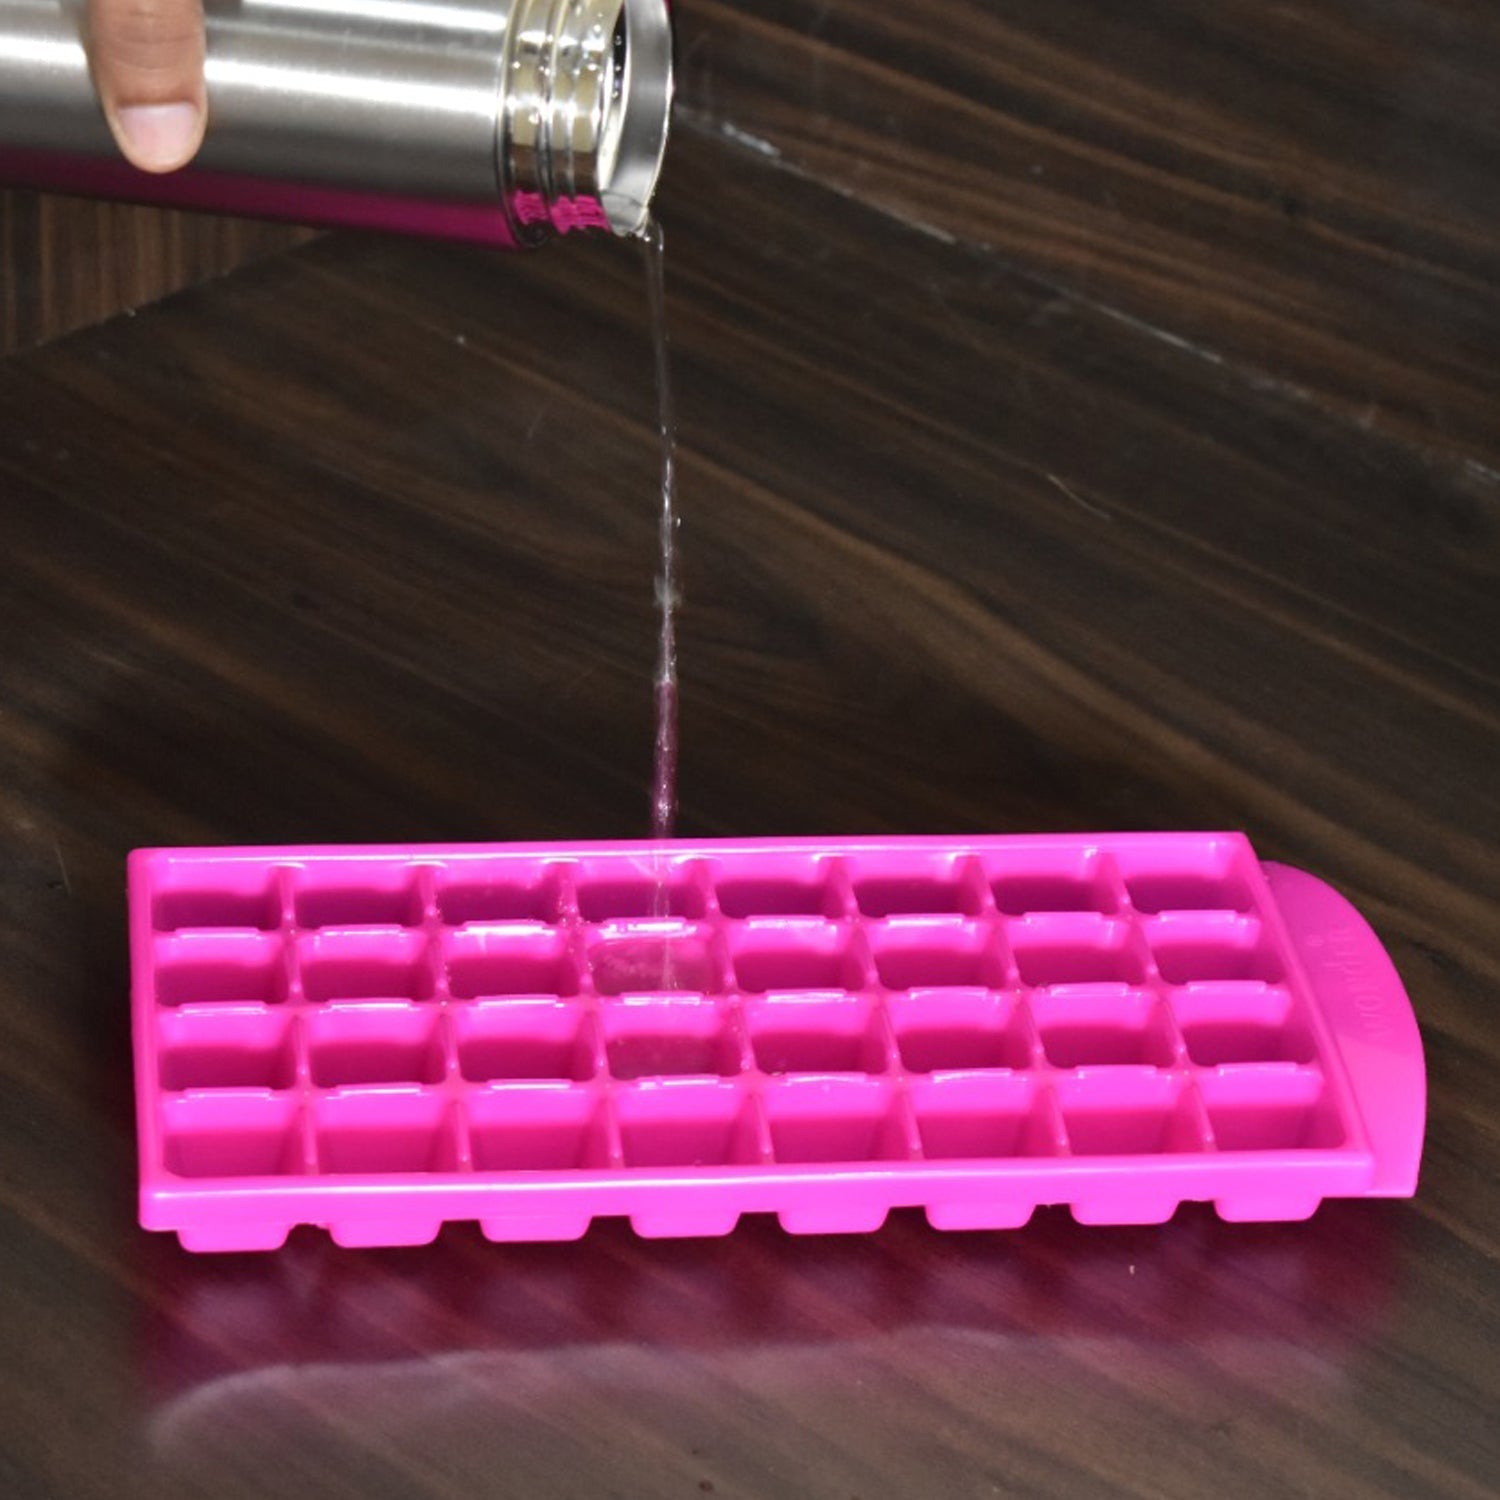 2795 32 Cavity Ice Tray For Making And Creating Ice Cubes Easily.